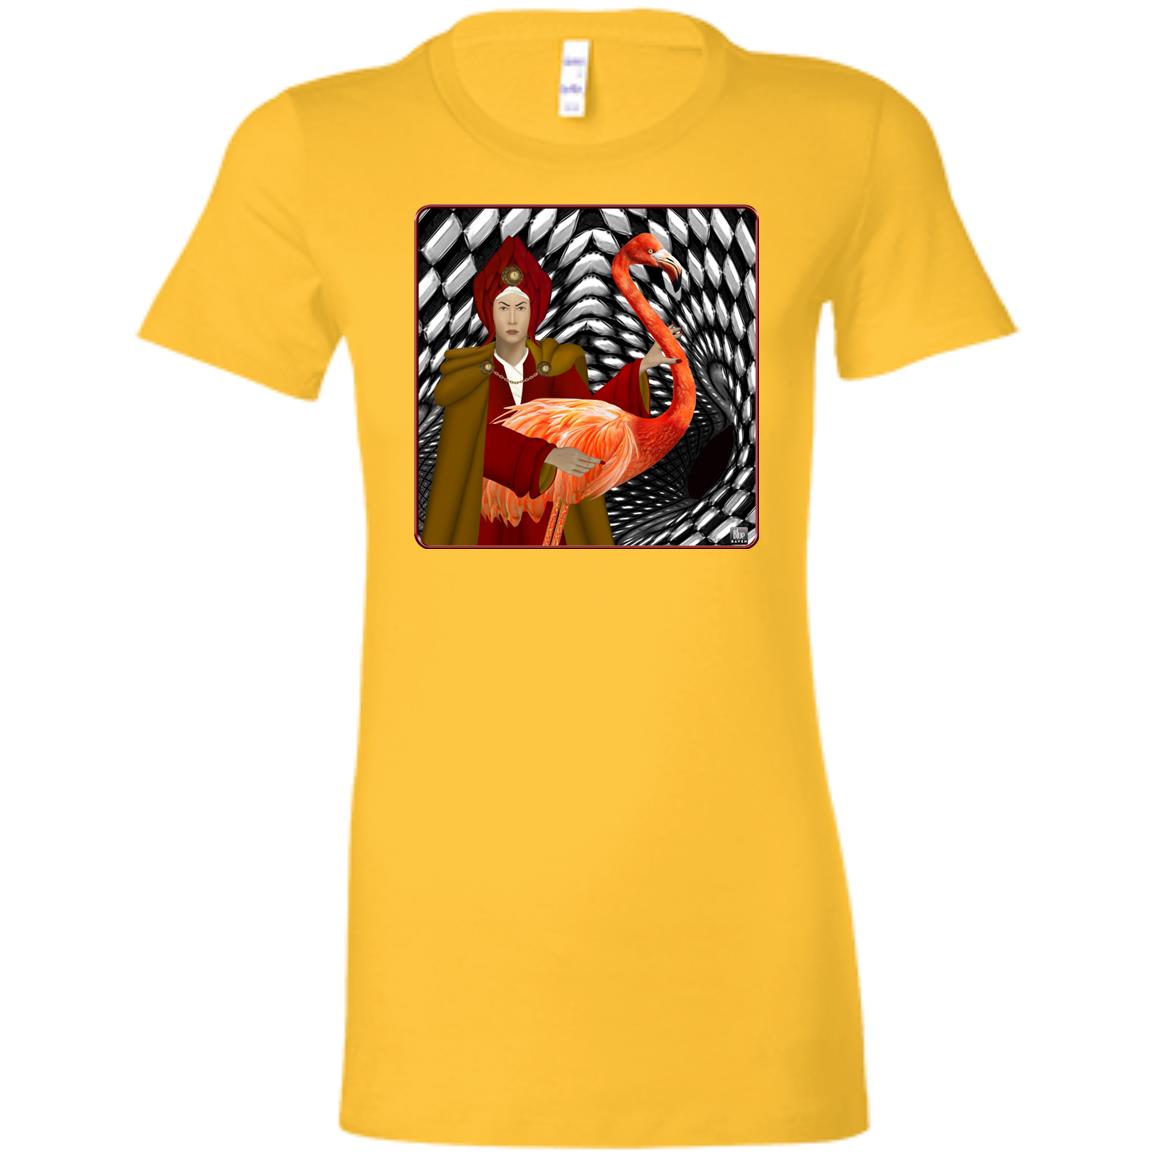 THE RED QUEEN with the flamingo - Women's Fitted T-Shirt